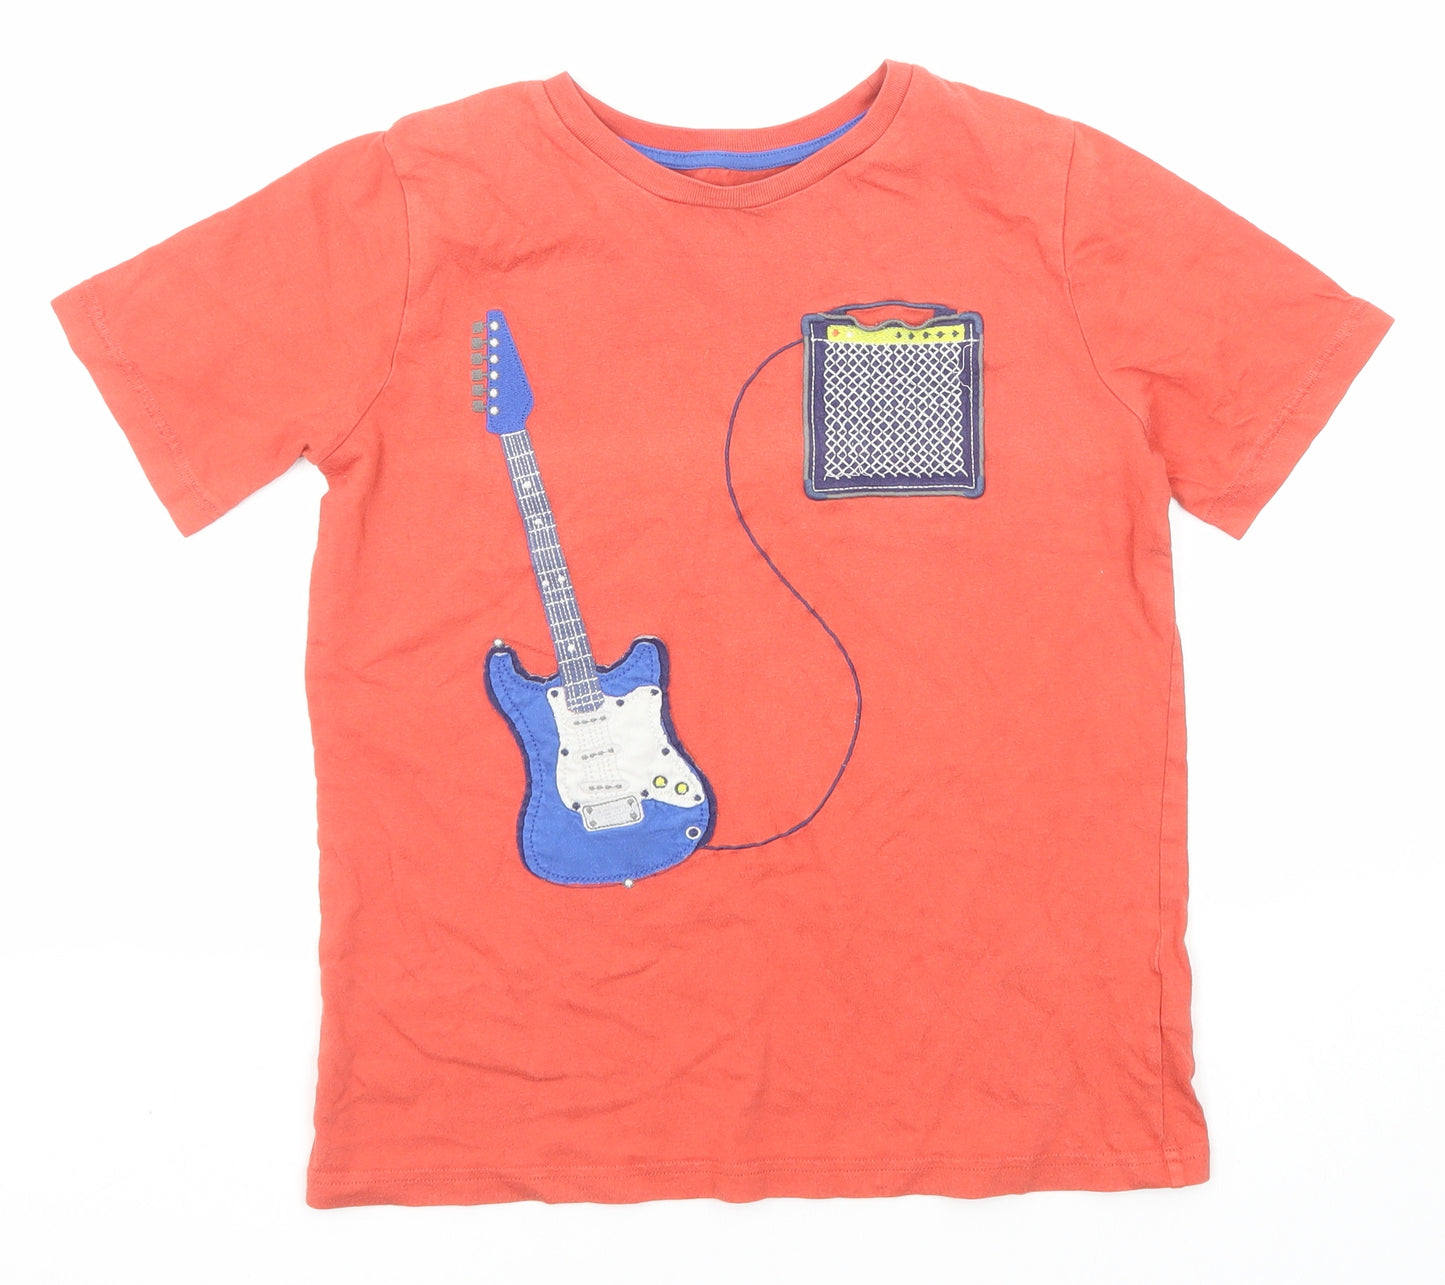 Mini Boden Boys Red Cotton Basic T-Shirt Size 11-12 Years Round Neck Pullover - Guitar